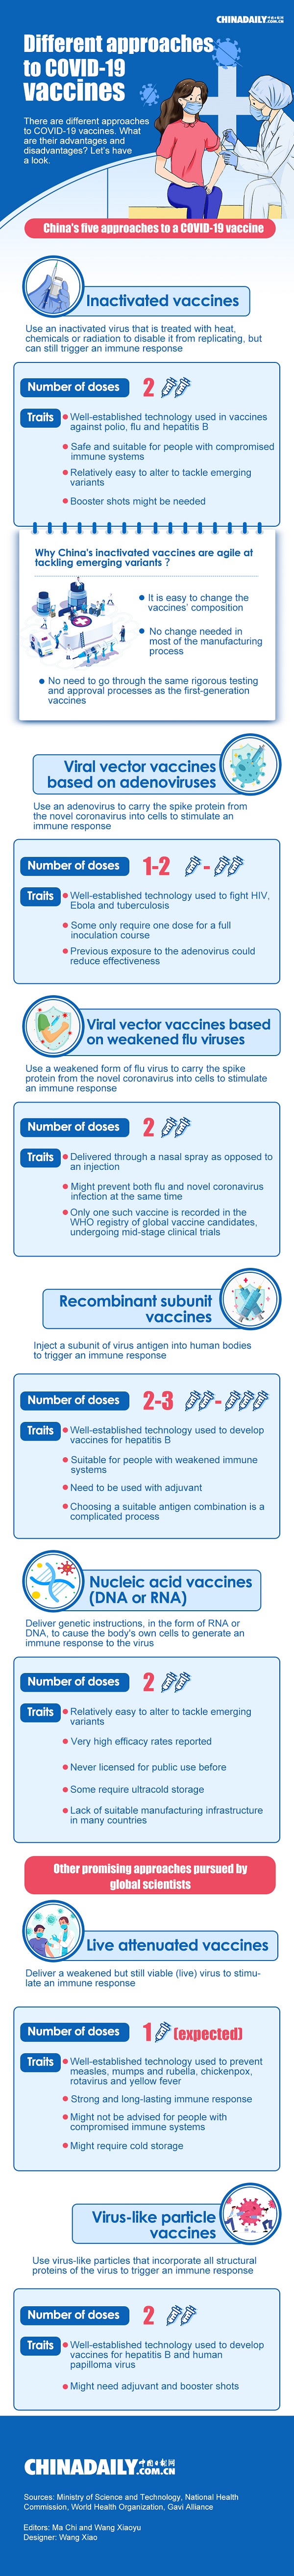 Different approaches to COVID-19 vaccines